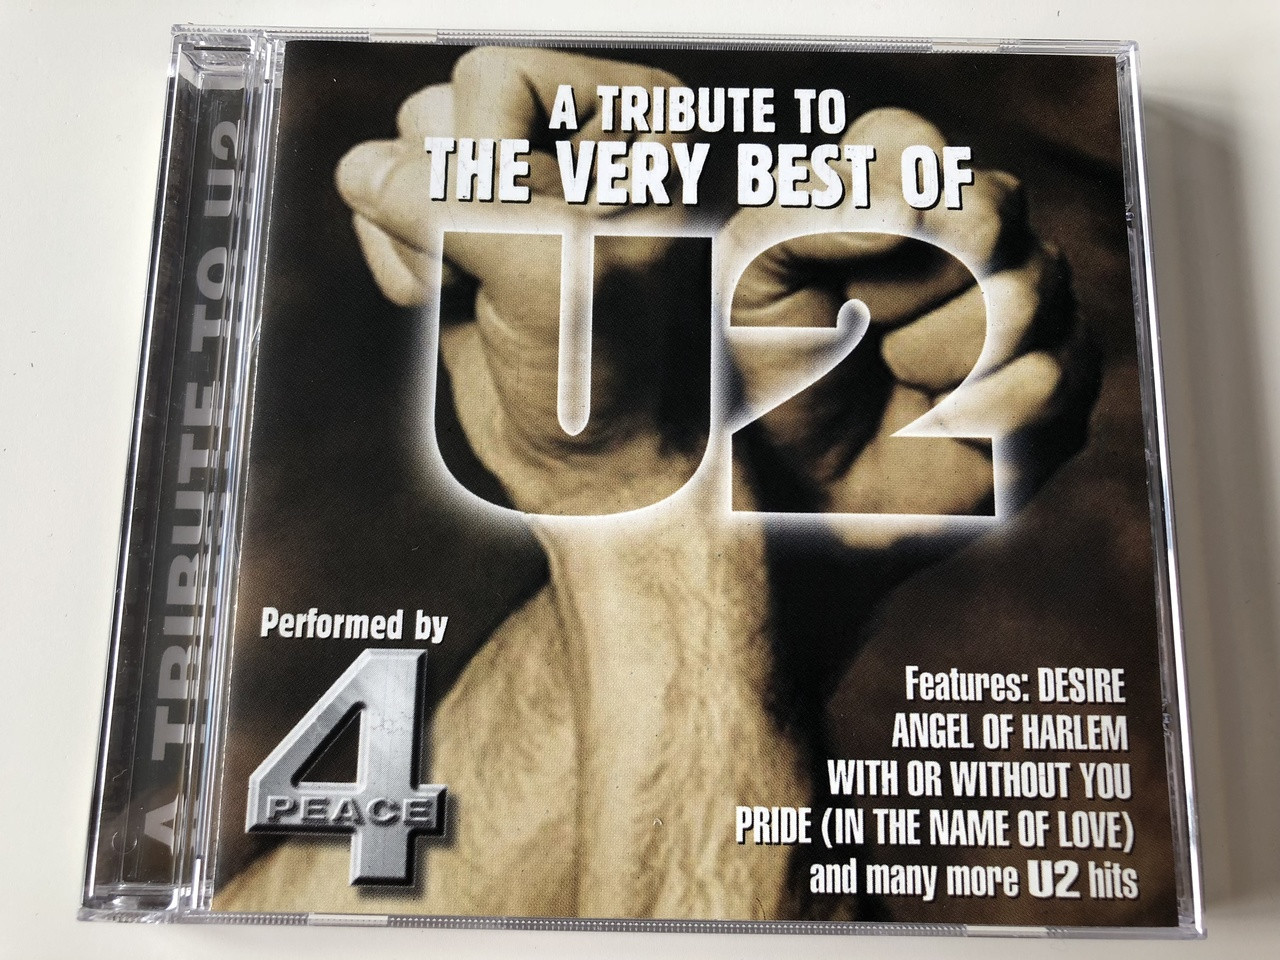 A Tribute to The very Best Of U2 / Performed by 4Peace / Audio CD 2002 /  Features: Desire